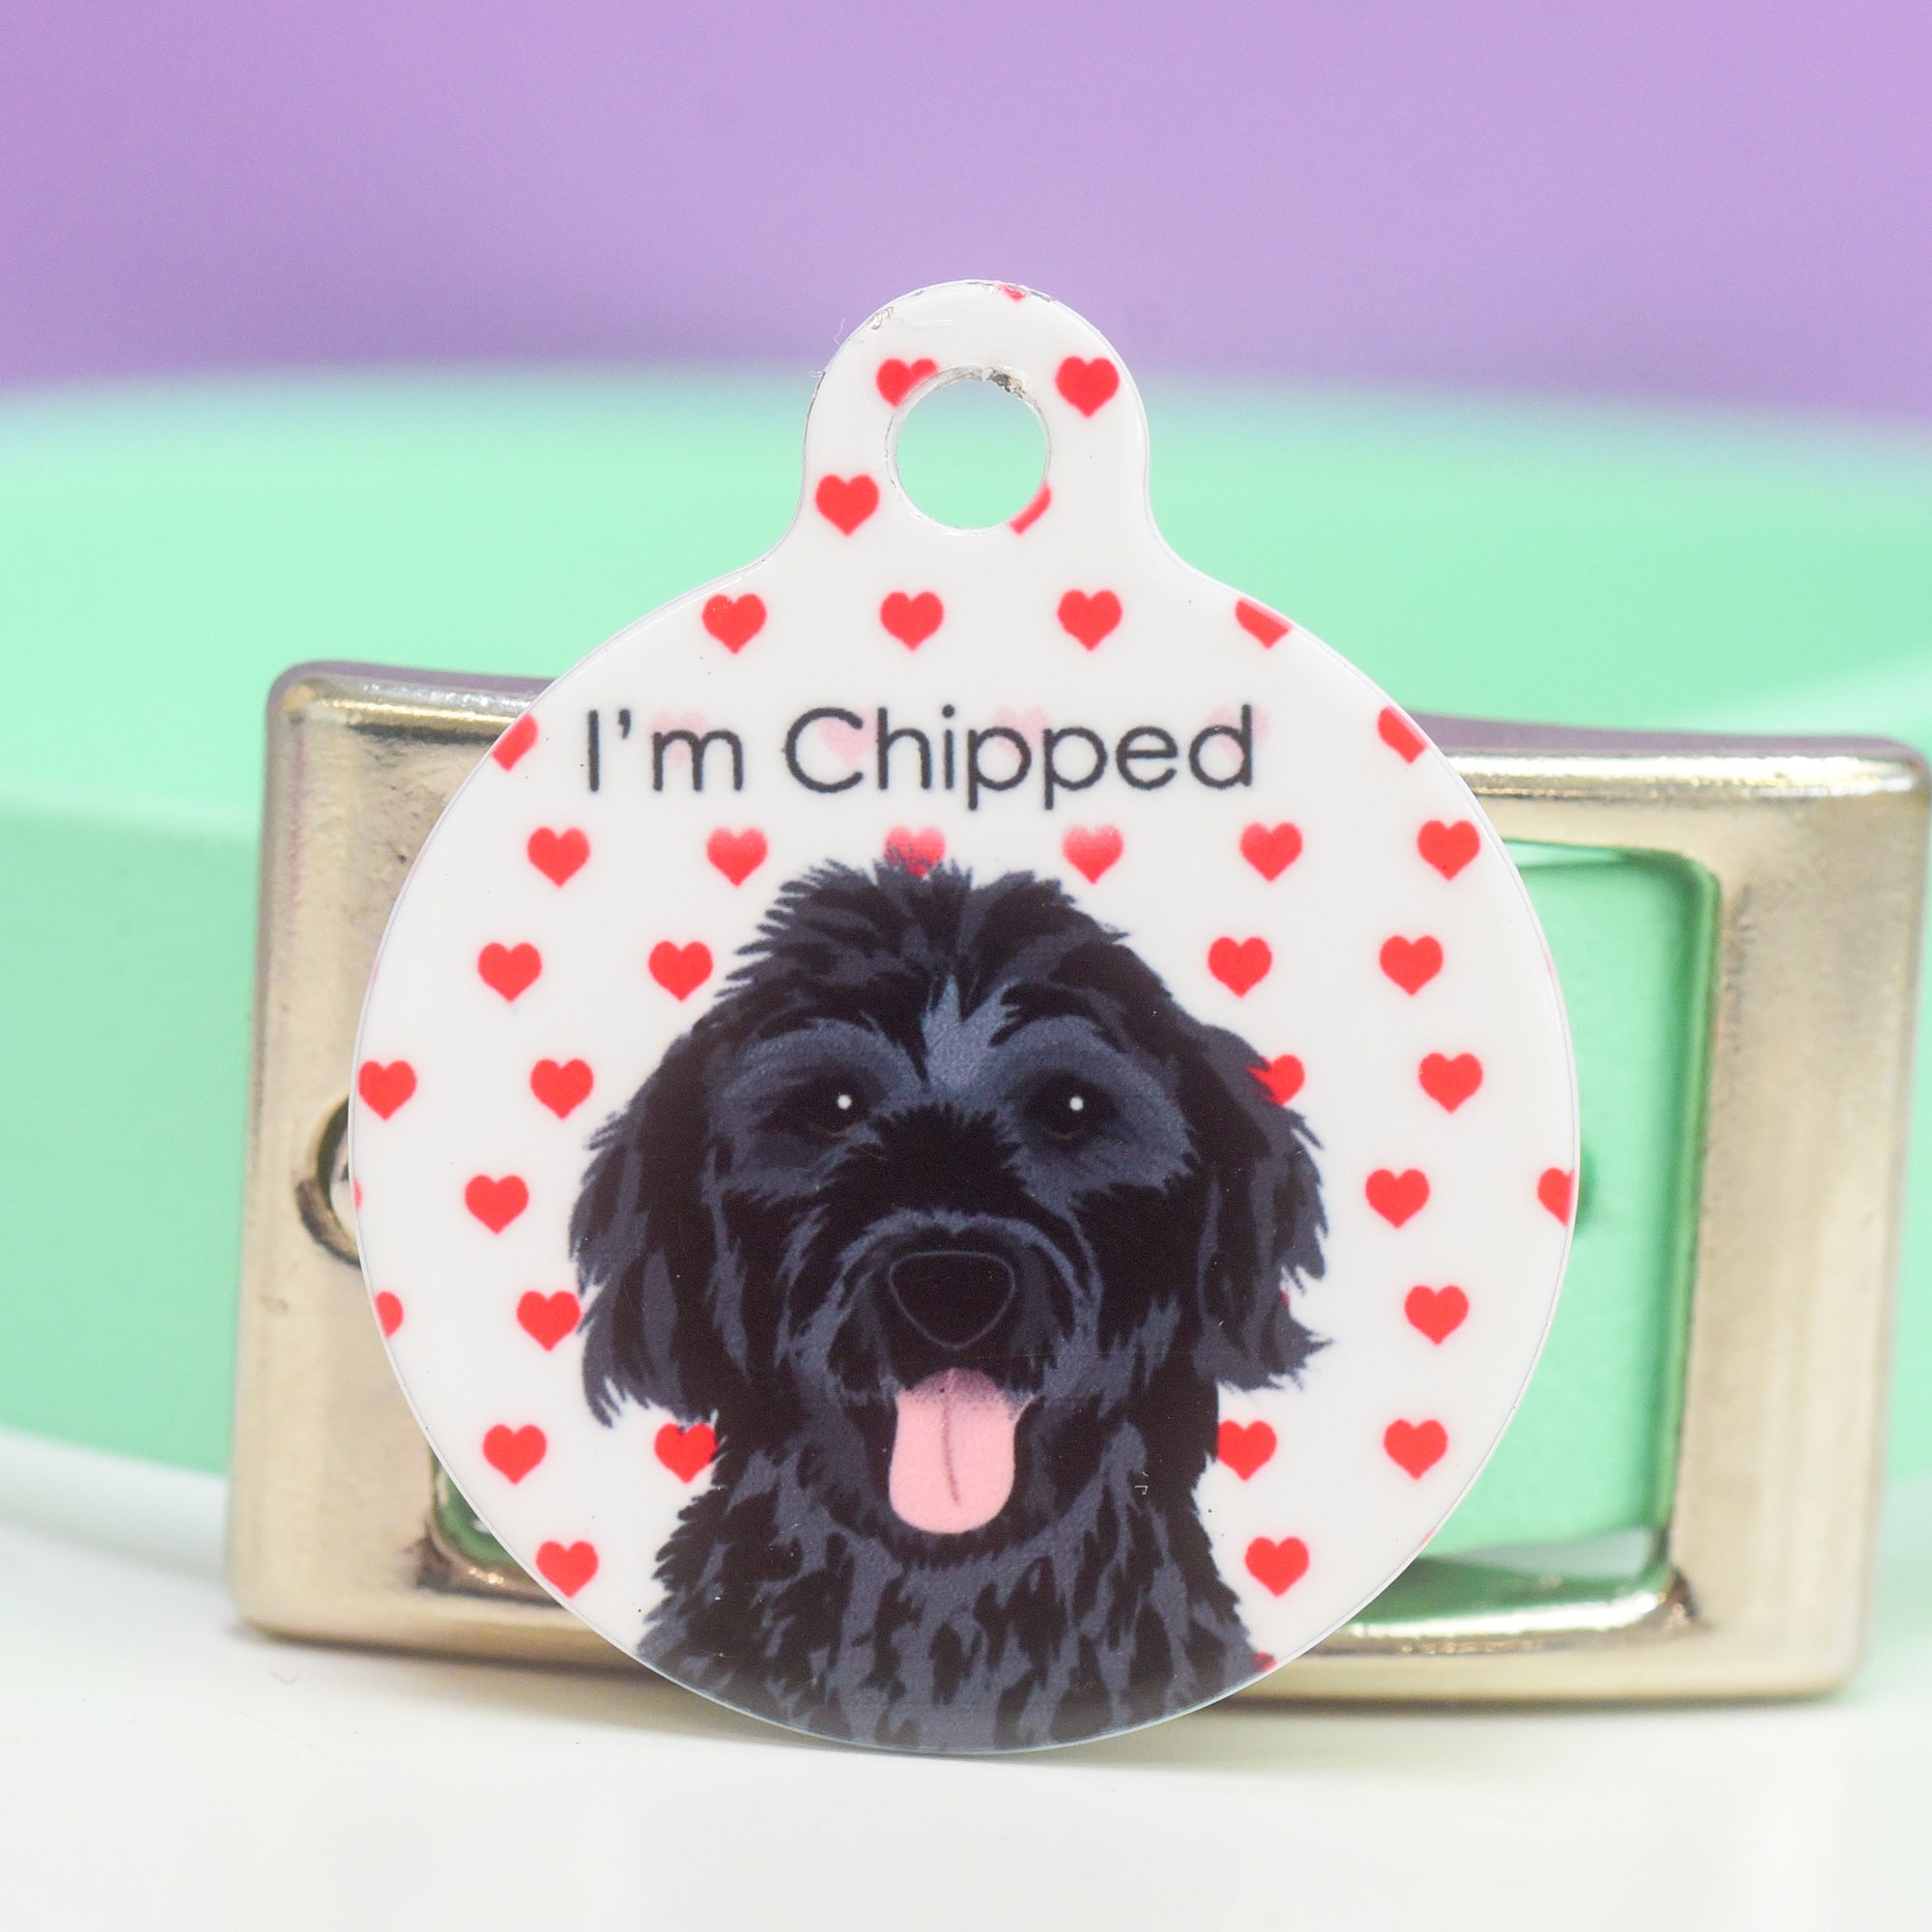 Love Heart Dog Tag Personalised - Realistic Illustrations